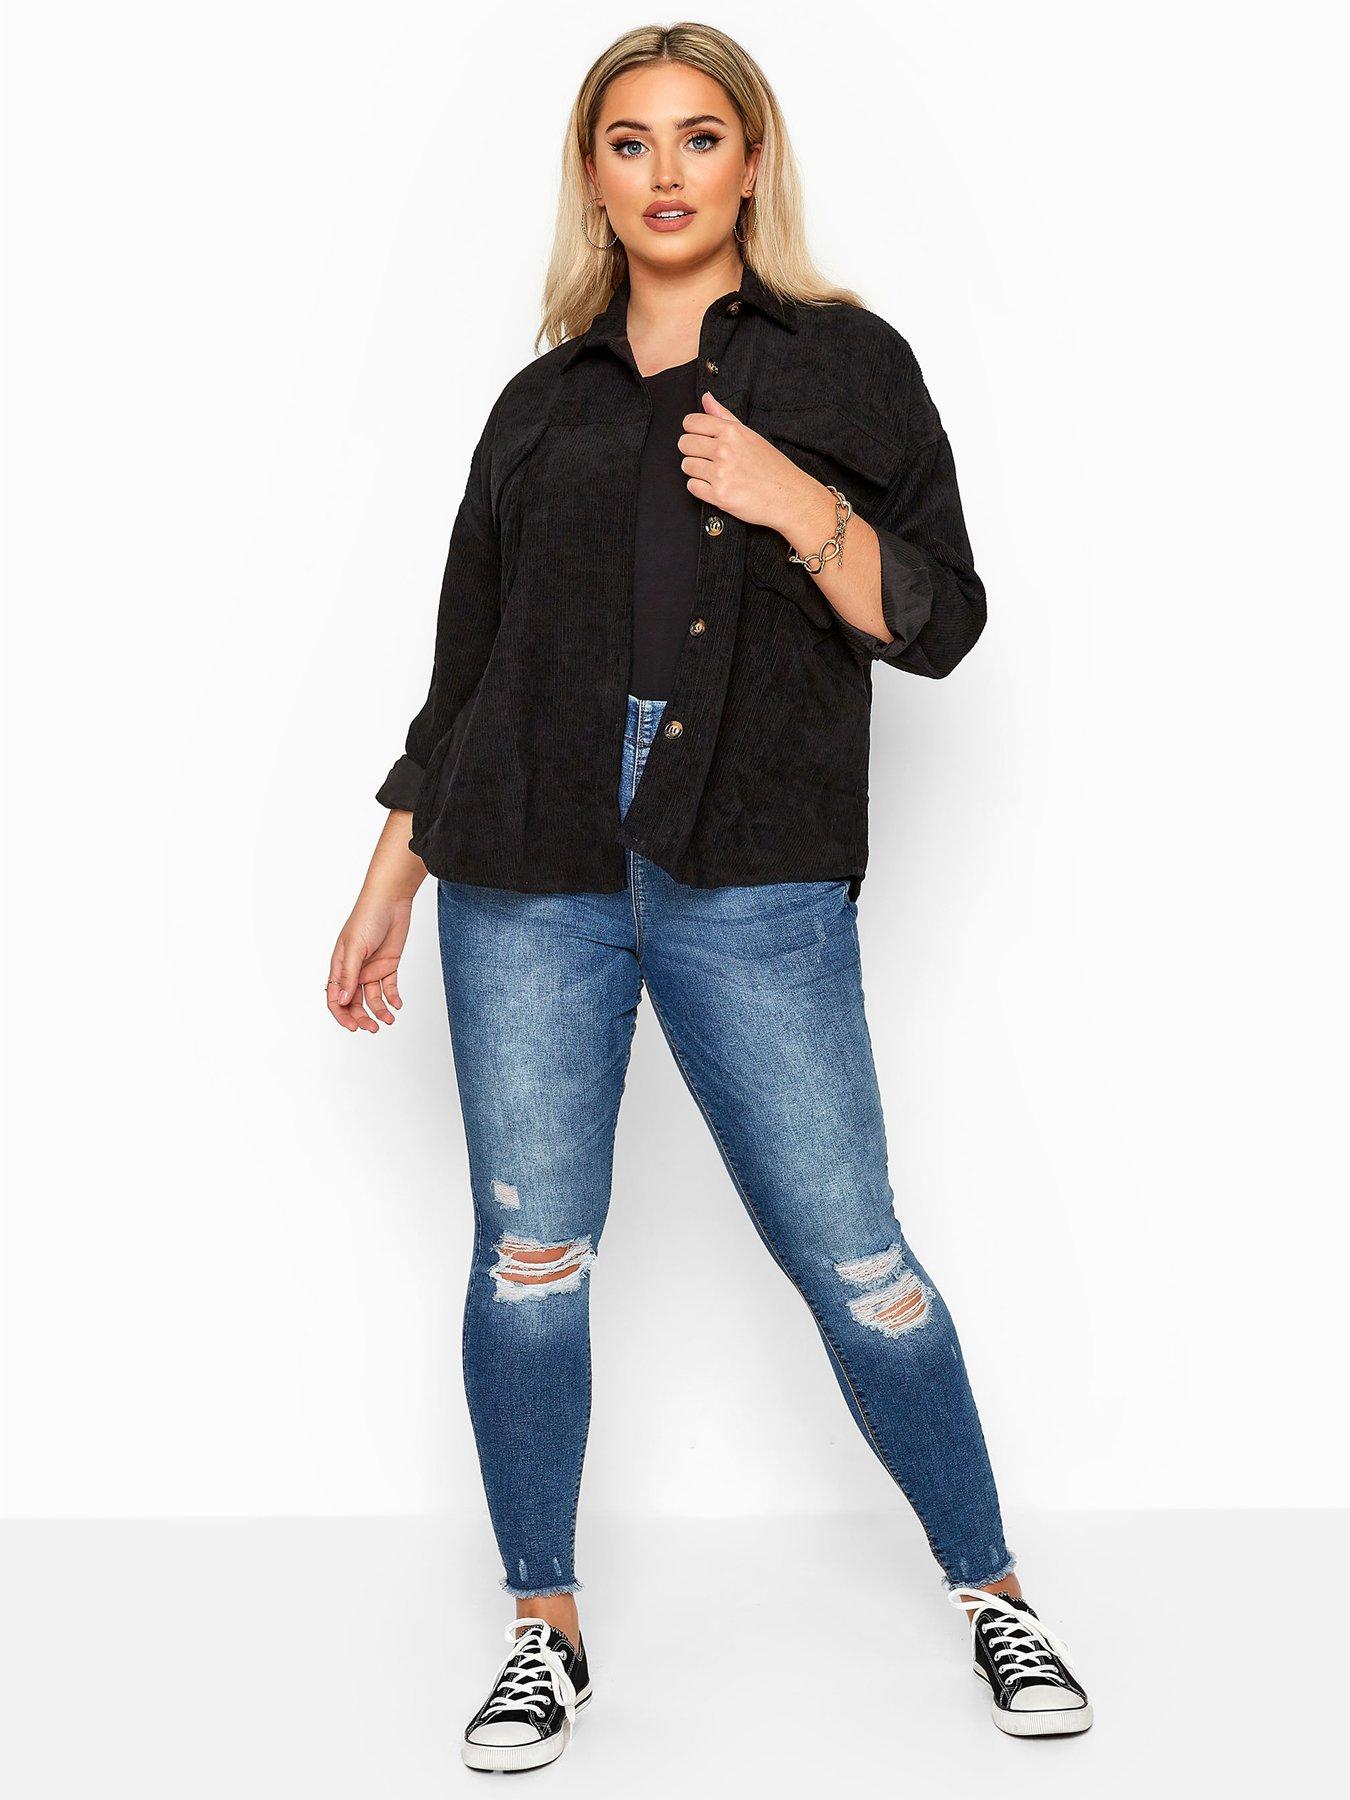 As Is Denim & Co. Comfy Knit Petite Jeggings with Side Slits